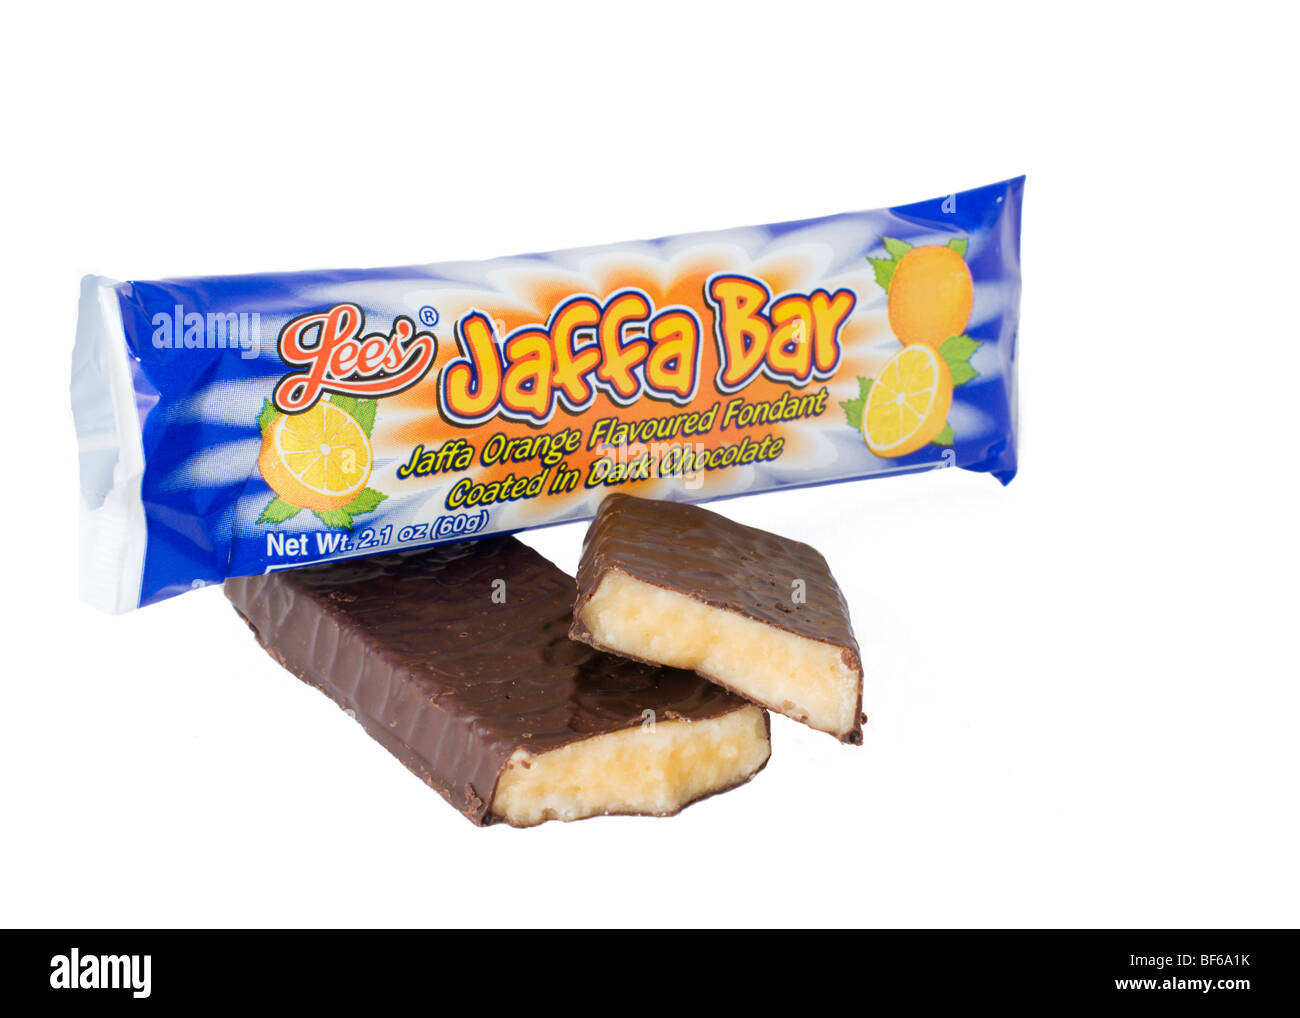 Close up view of unwrapped Lee's Jaffa Bar with wrapper in background. Stock Photo